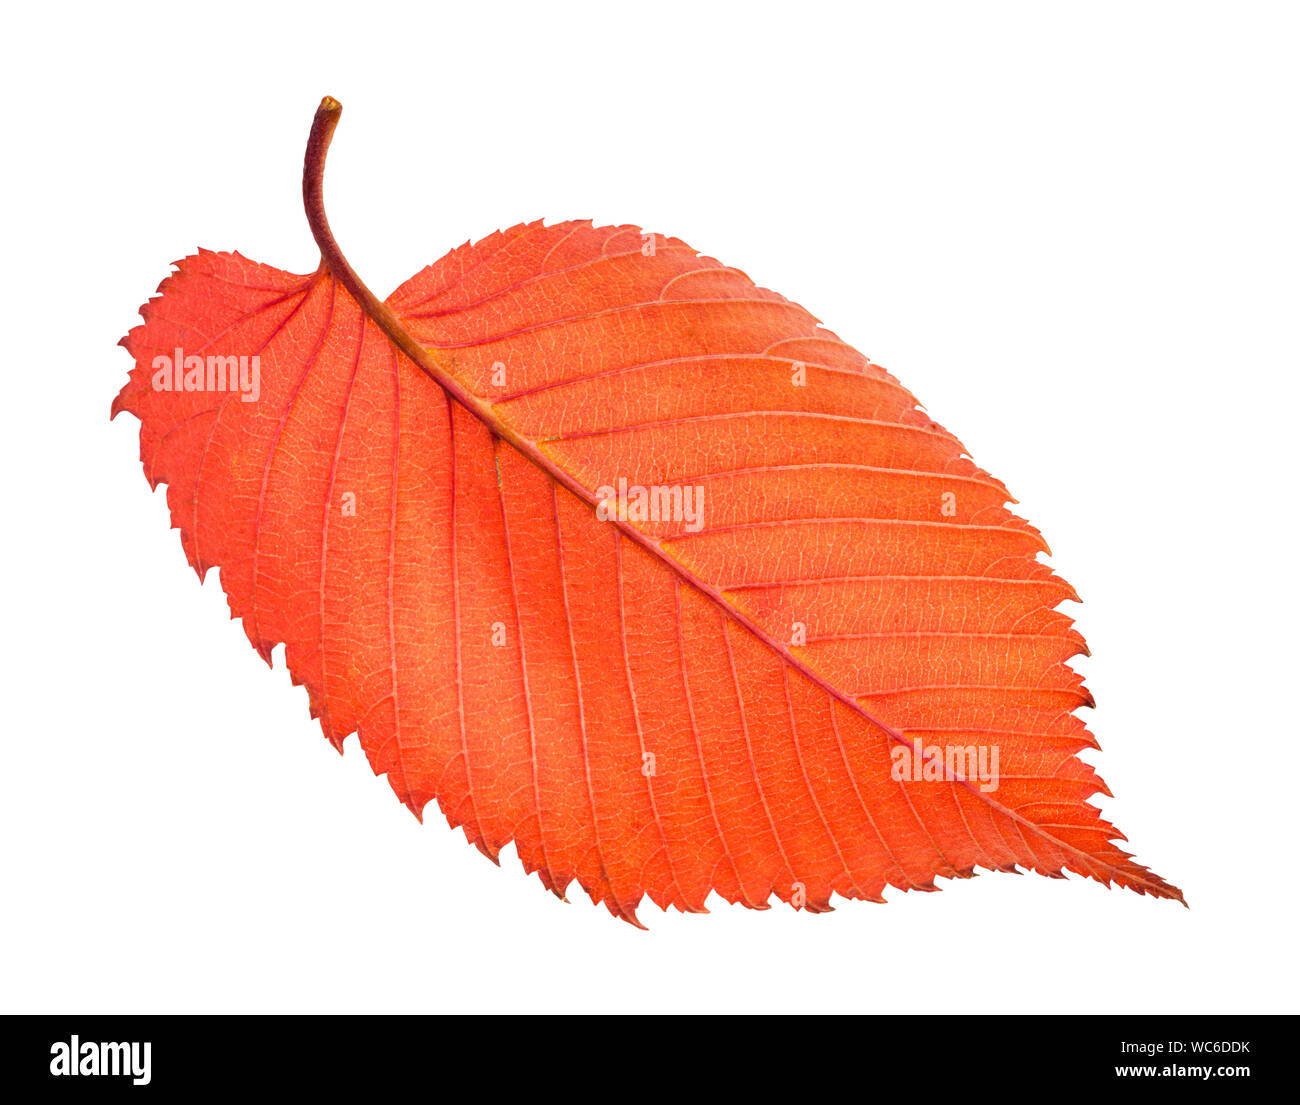 back side of red fallen leaf of elm tree isolated on white background Stock Photo